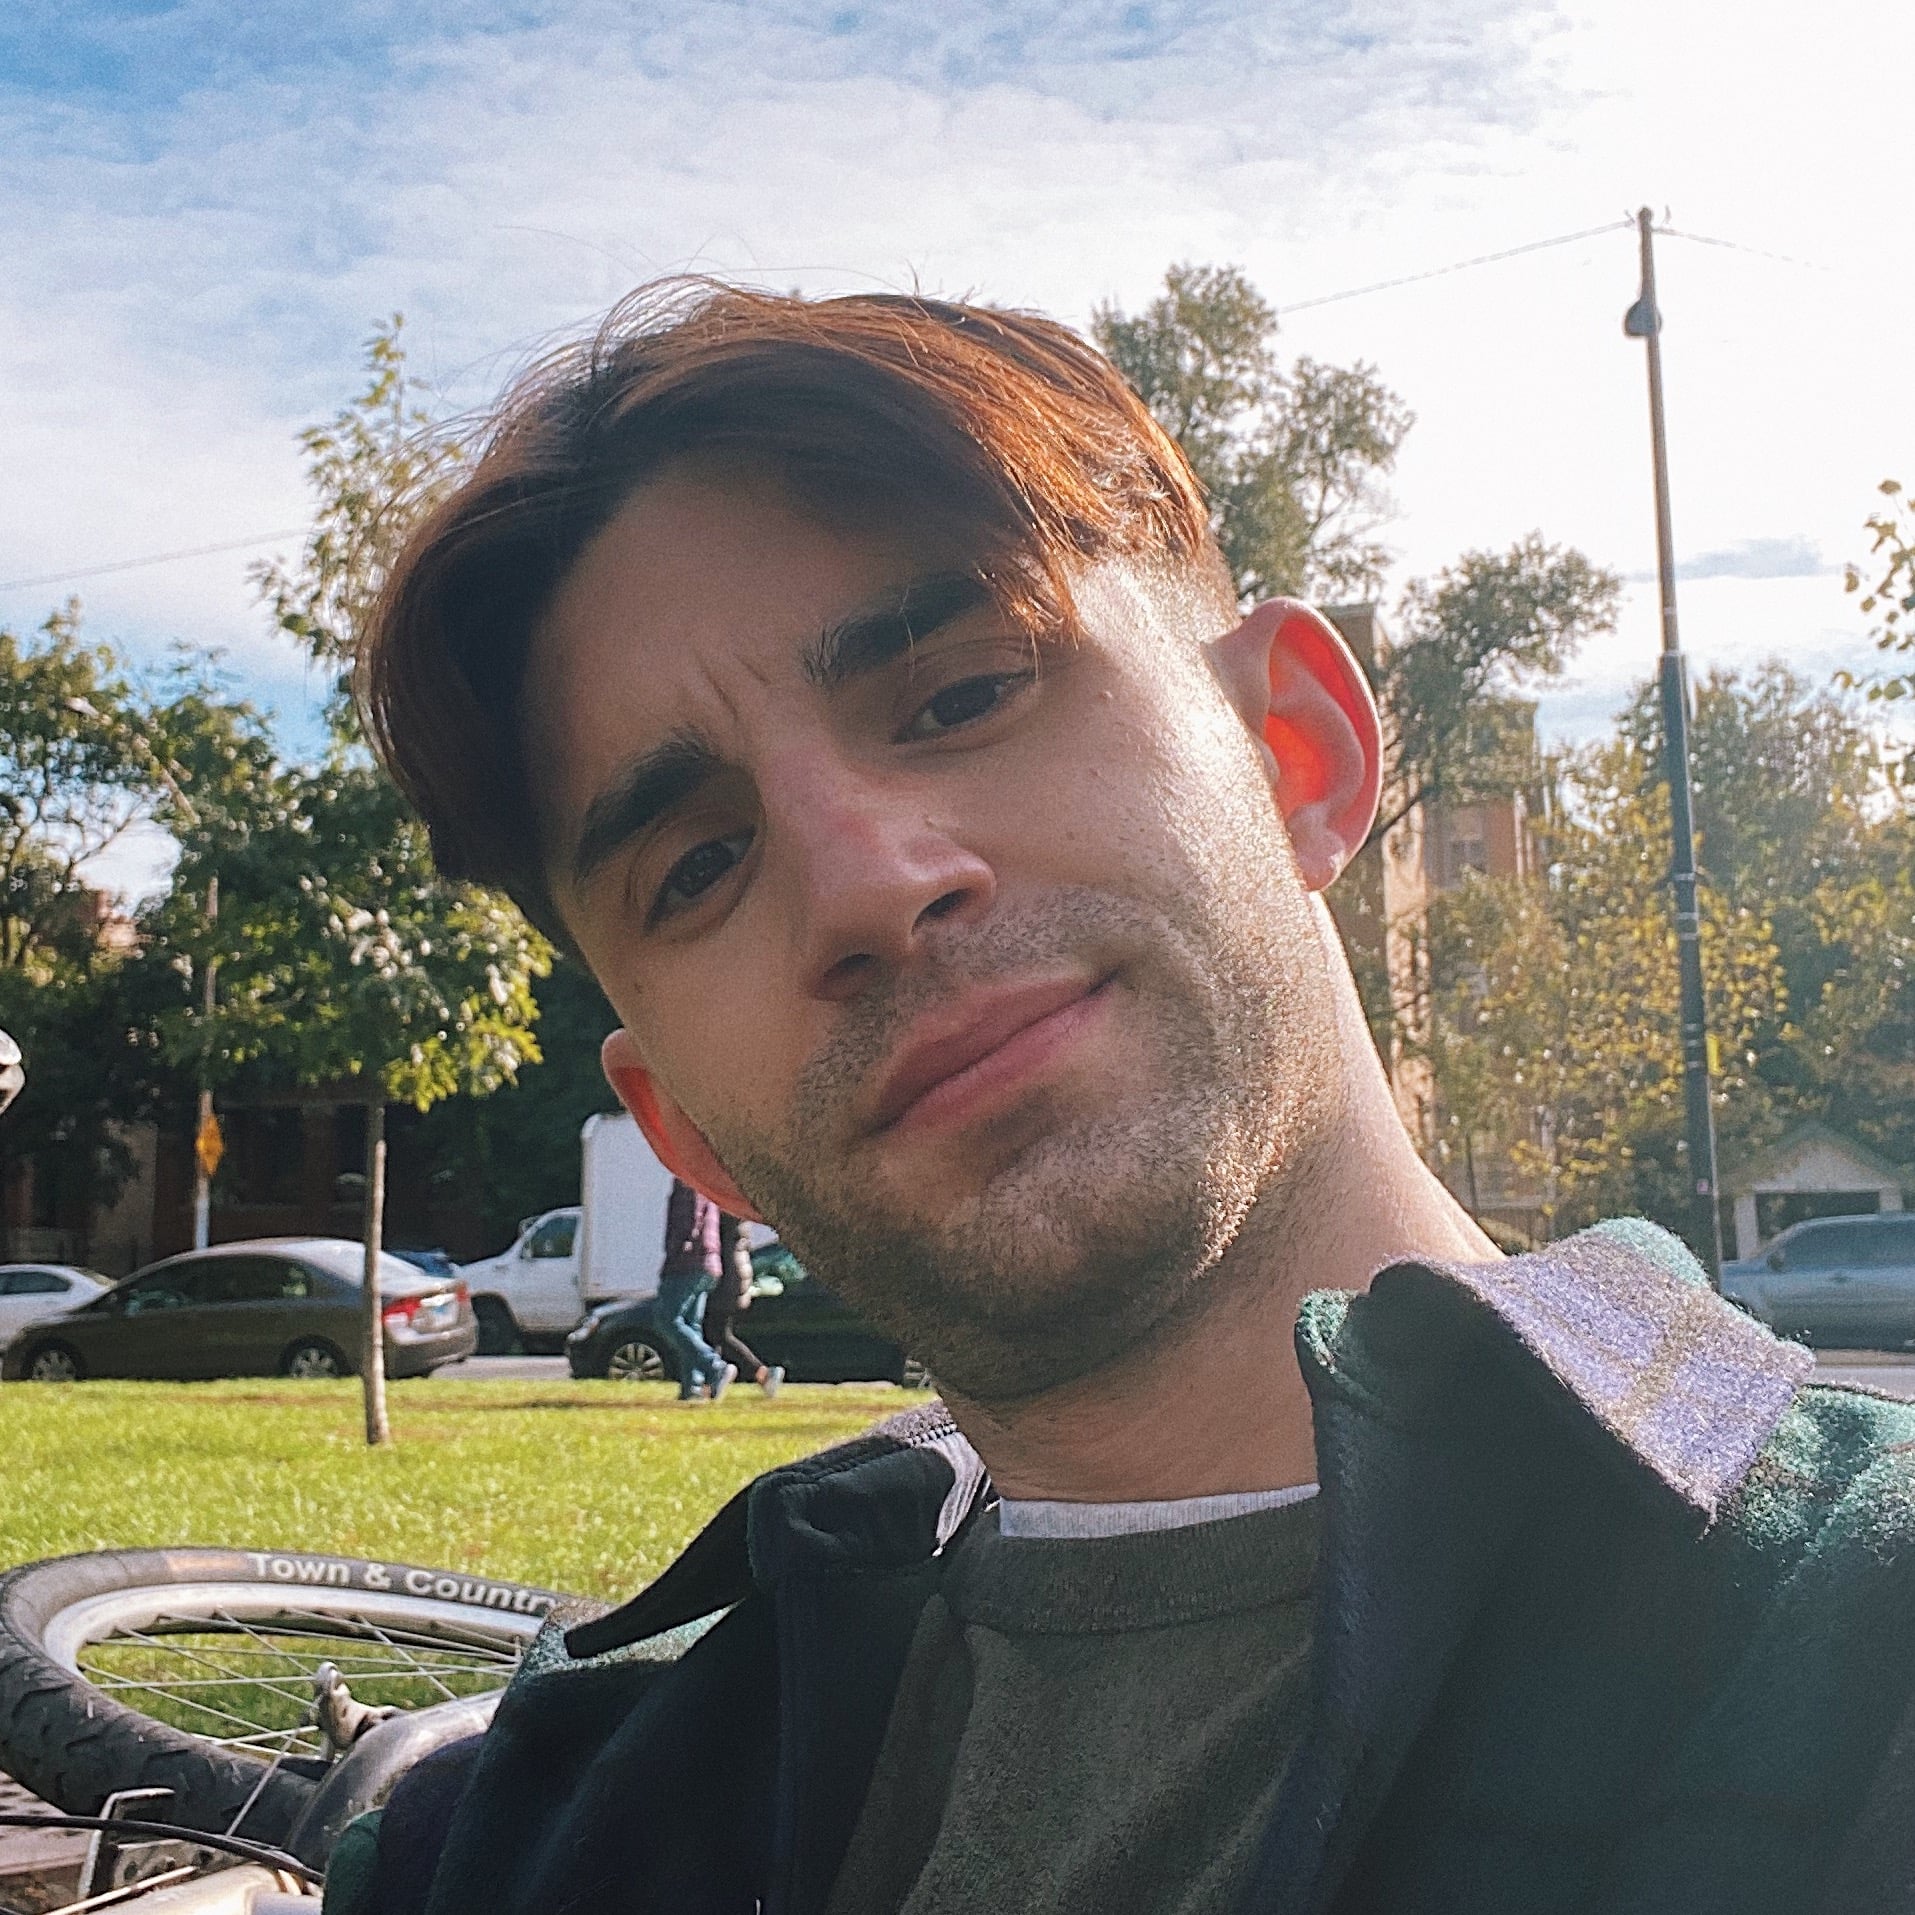 Profile picture of Stephen lookin' cute at the park.